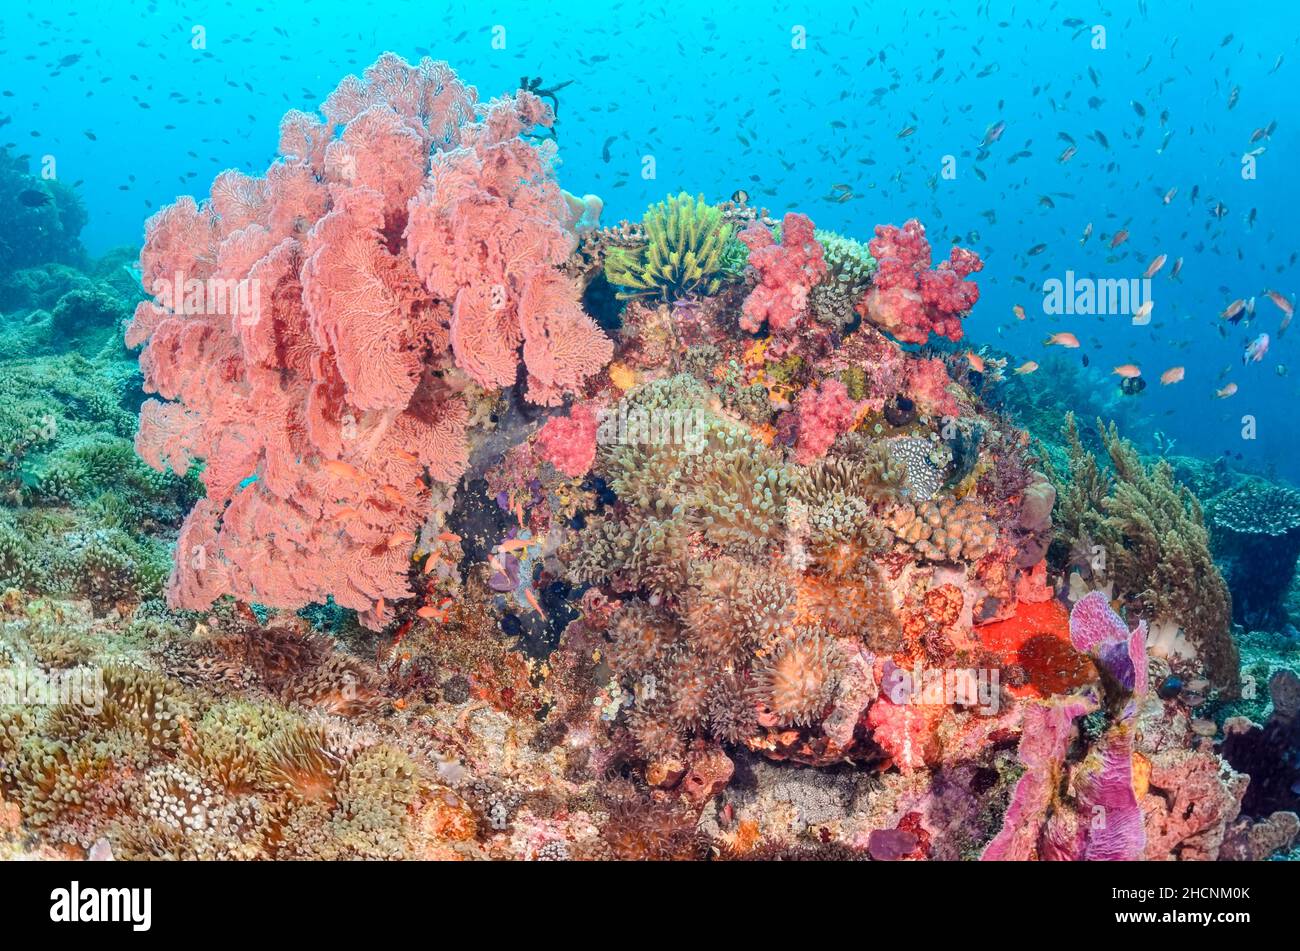 A healthy coral reef with a large sea fan, Melithaea sp., and anemones, Alor, Nusa Tenggara, Indonesia, Pacific Stock Photo